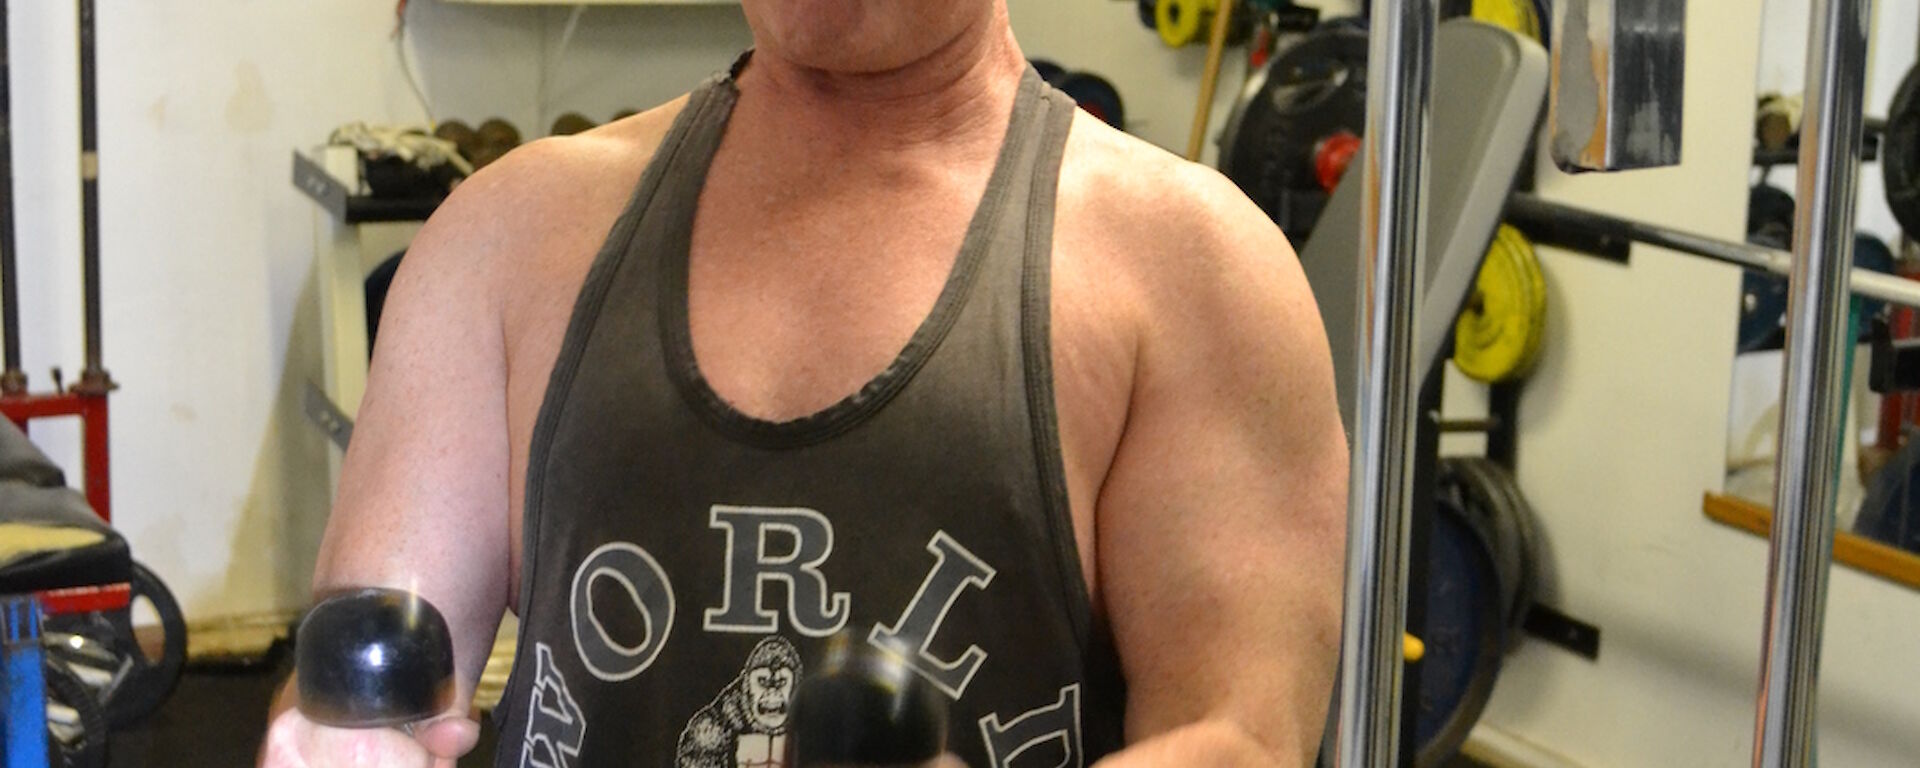 An expeditioner gives his torso a workout